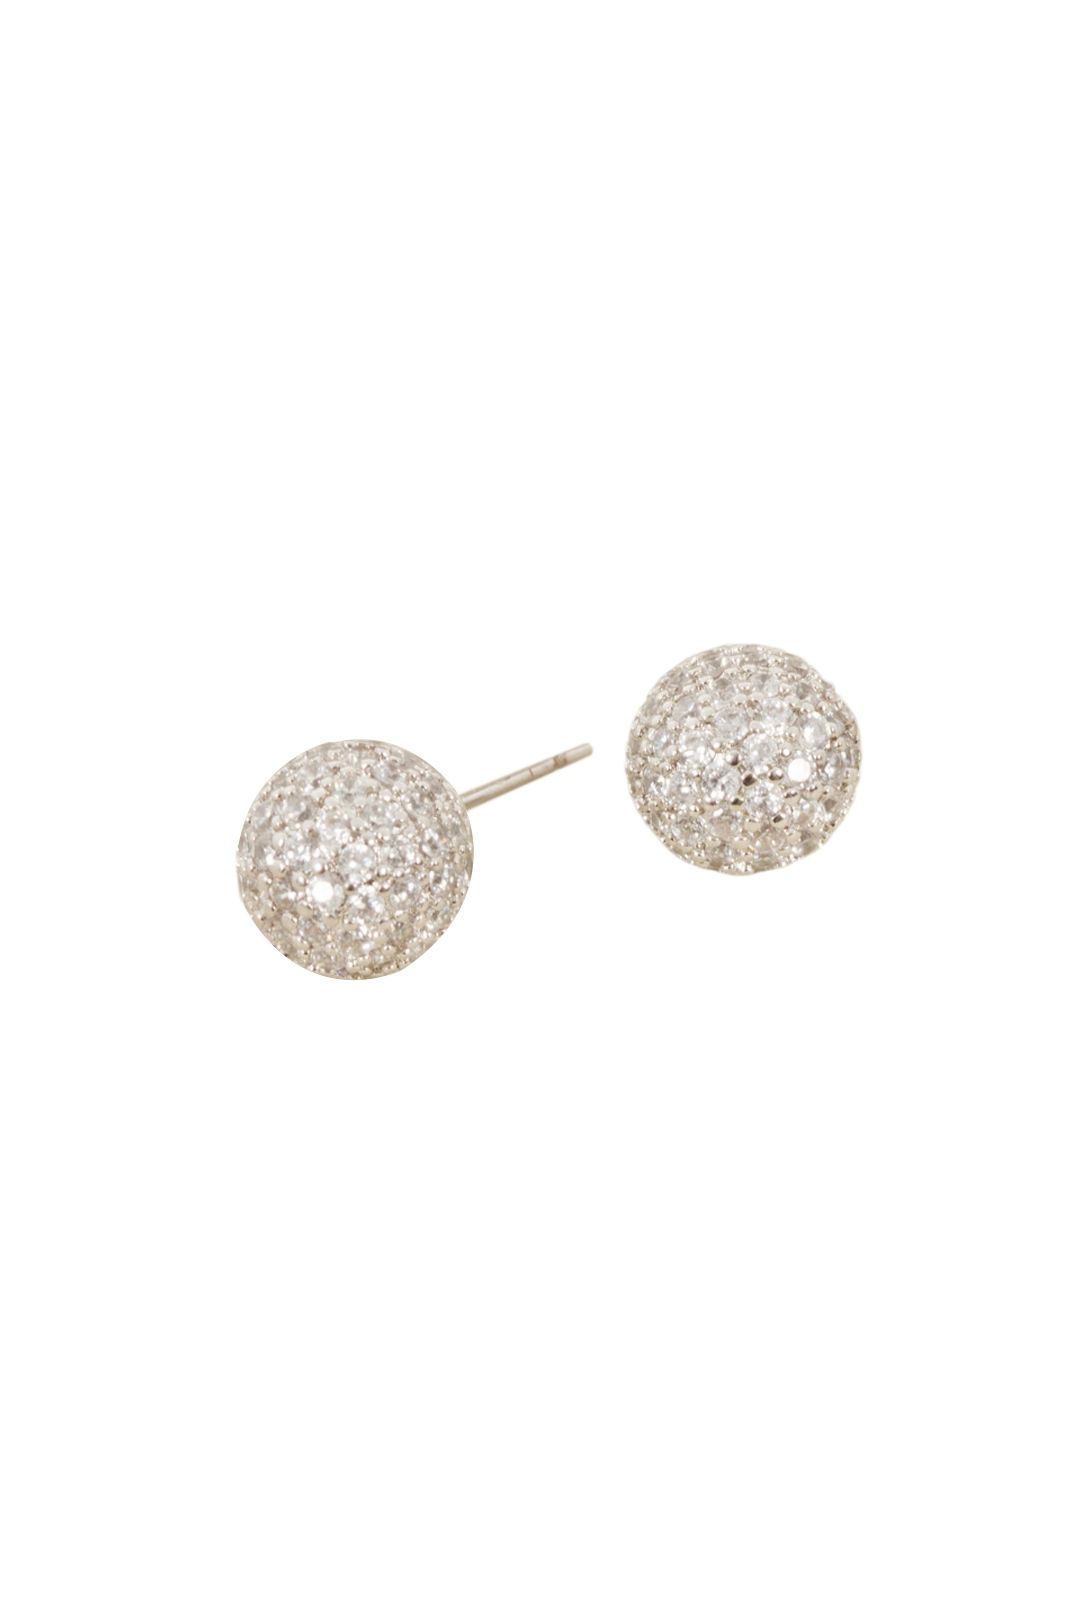 Adorne - Diamante Covered Ball Stud Earring - Silver Crystal - Front